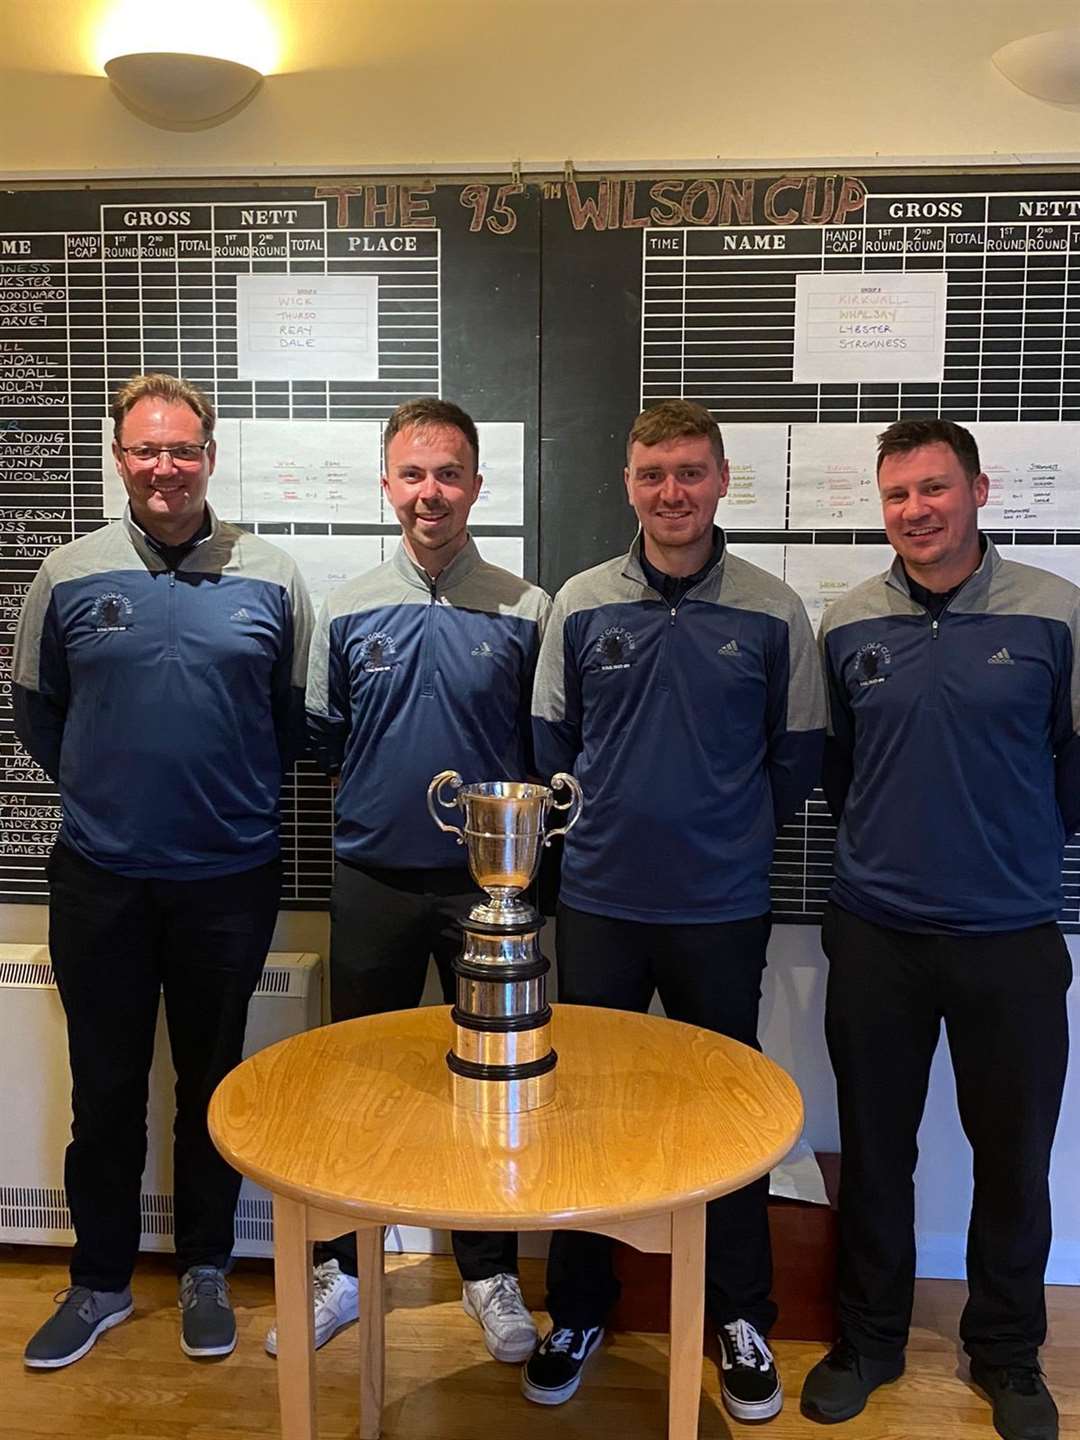 The Reay team who played in the Wilson Cup – Colin Paterson, Gregor Munro, Tom Ross and Michael Smith.